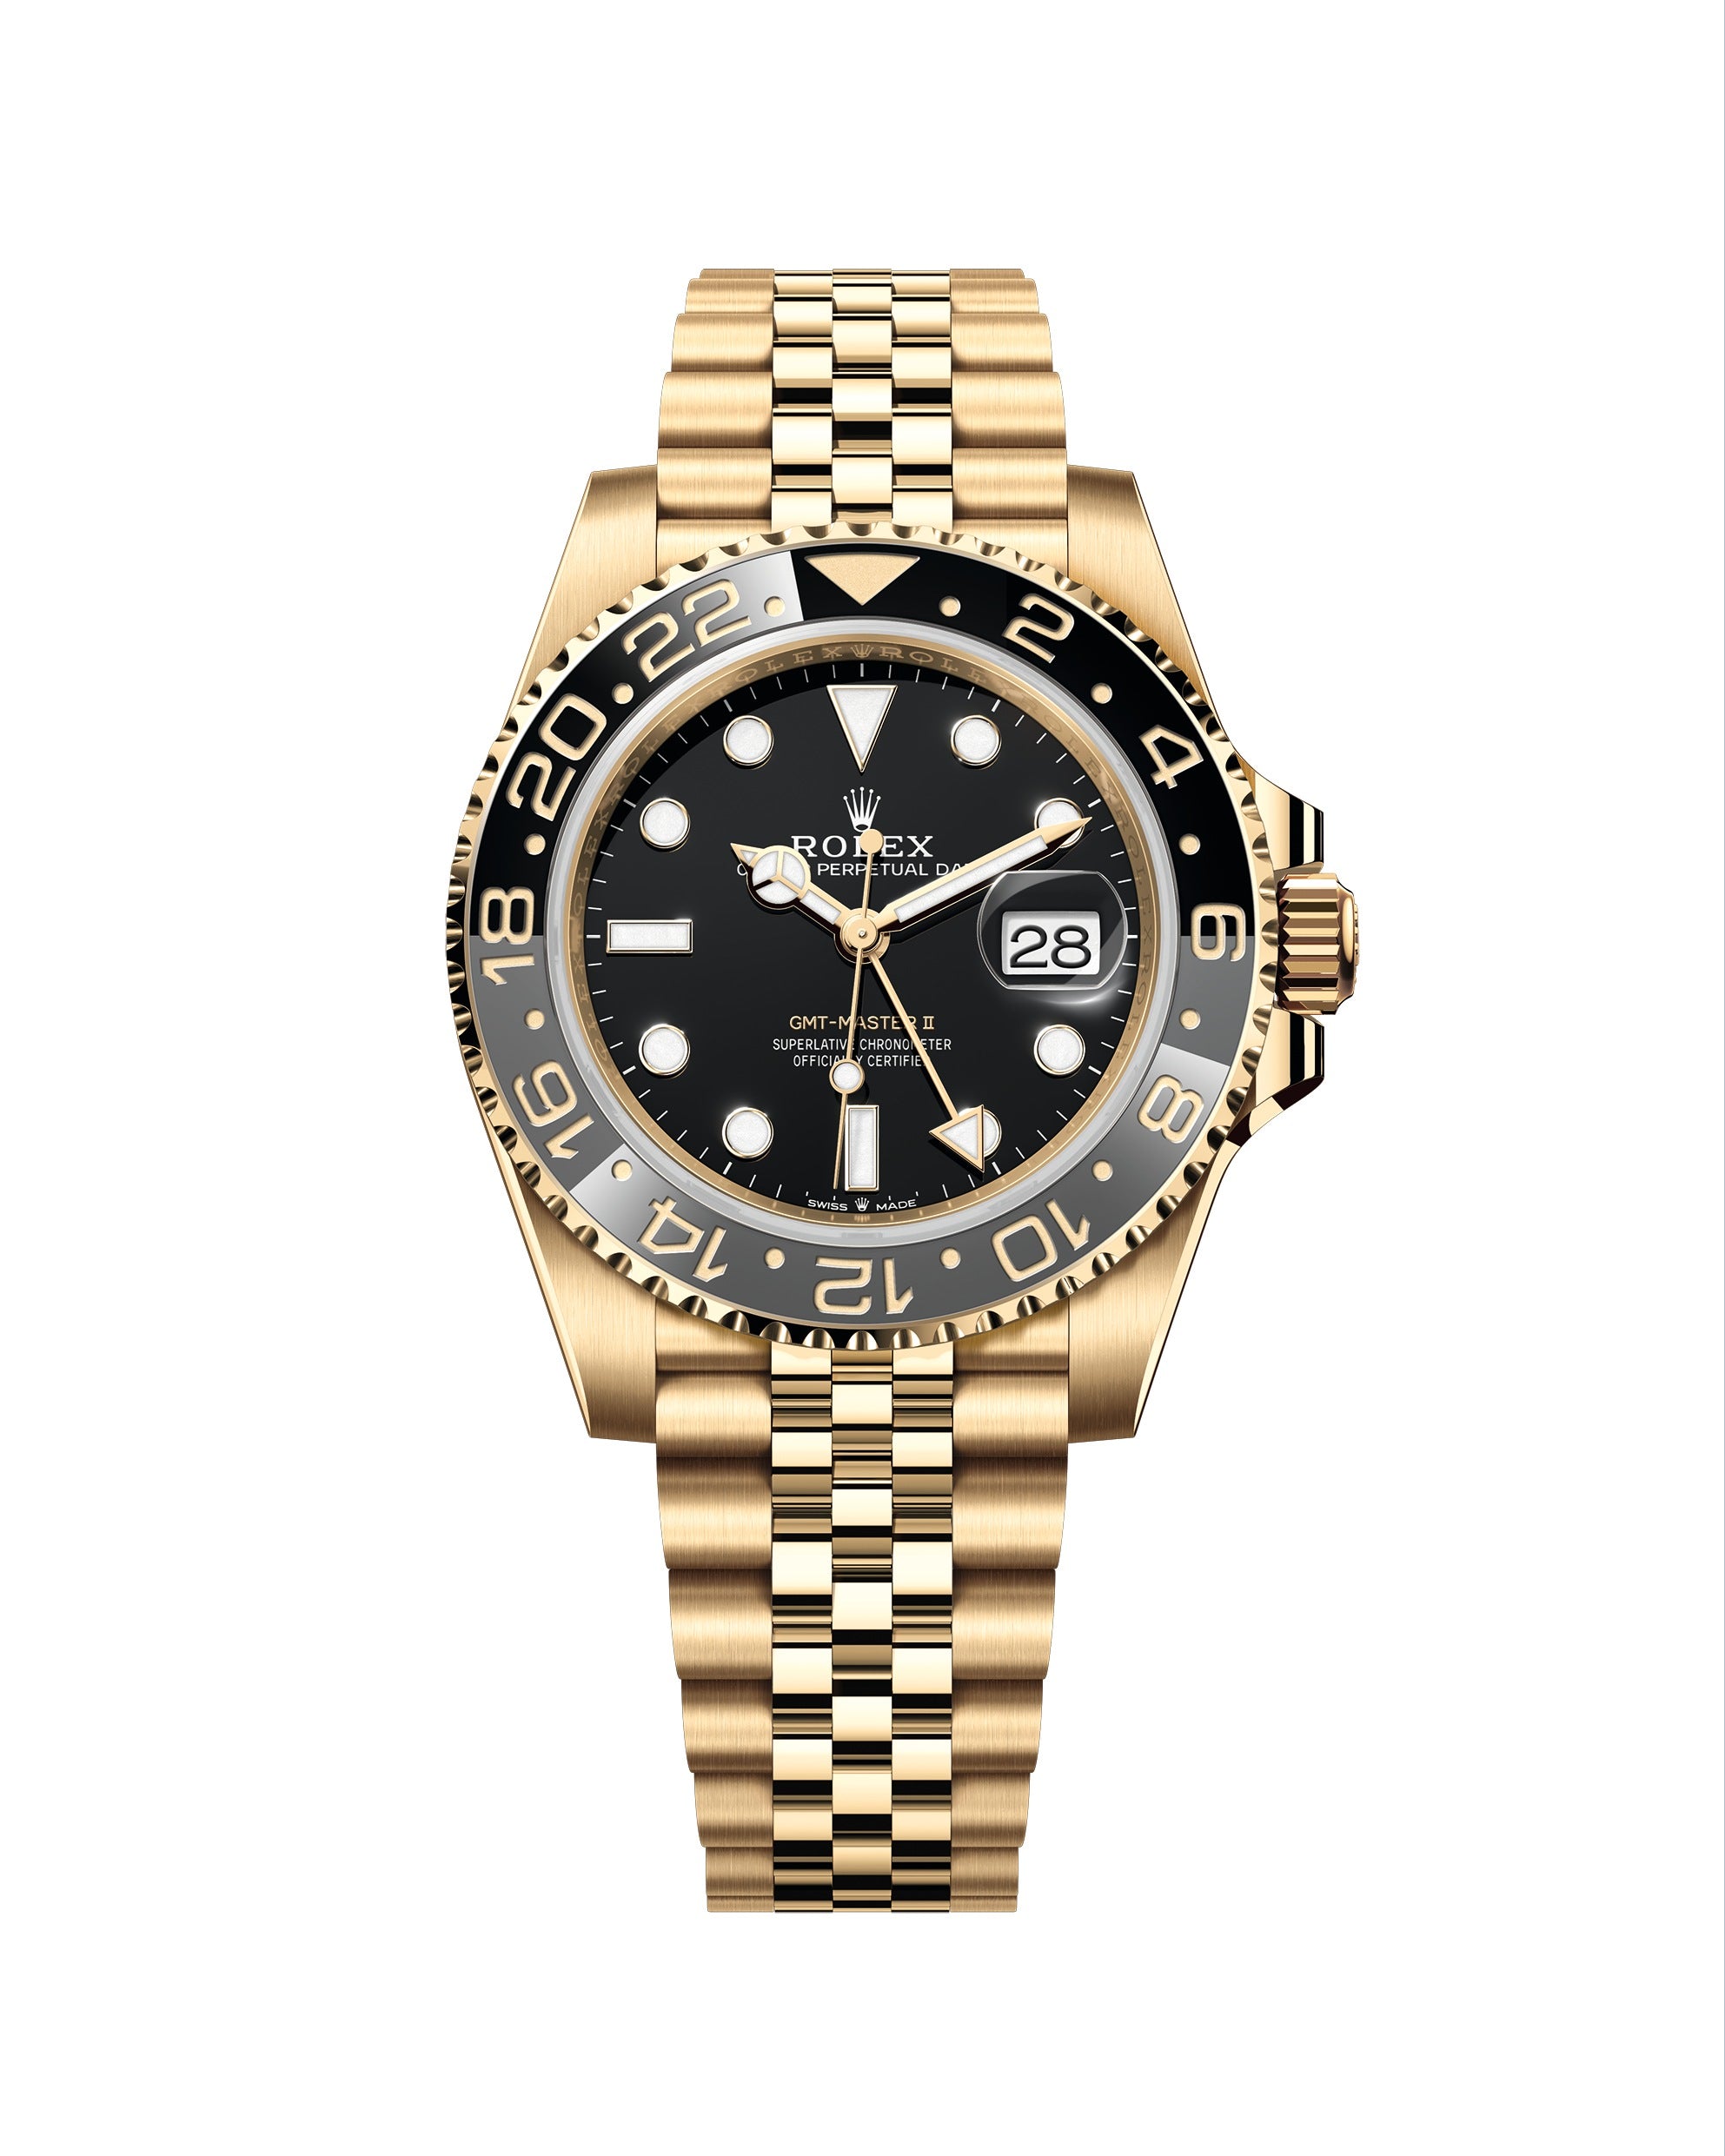 Rolex GMT-Master II Gold Guiness Grey and Black Bezel